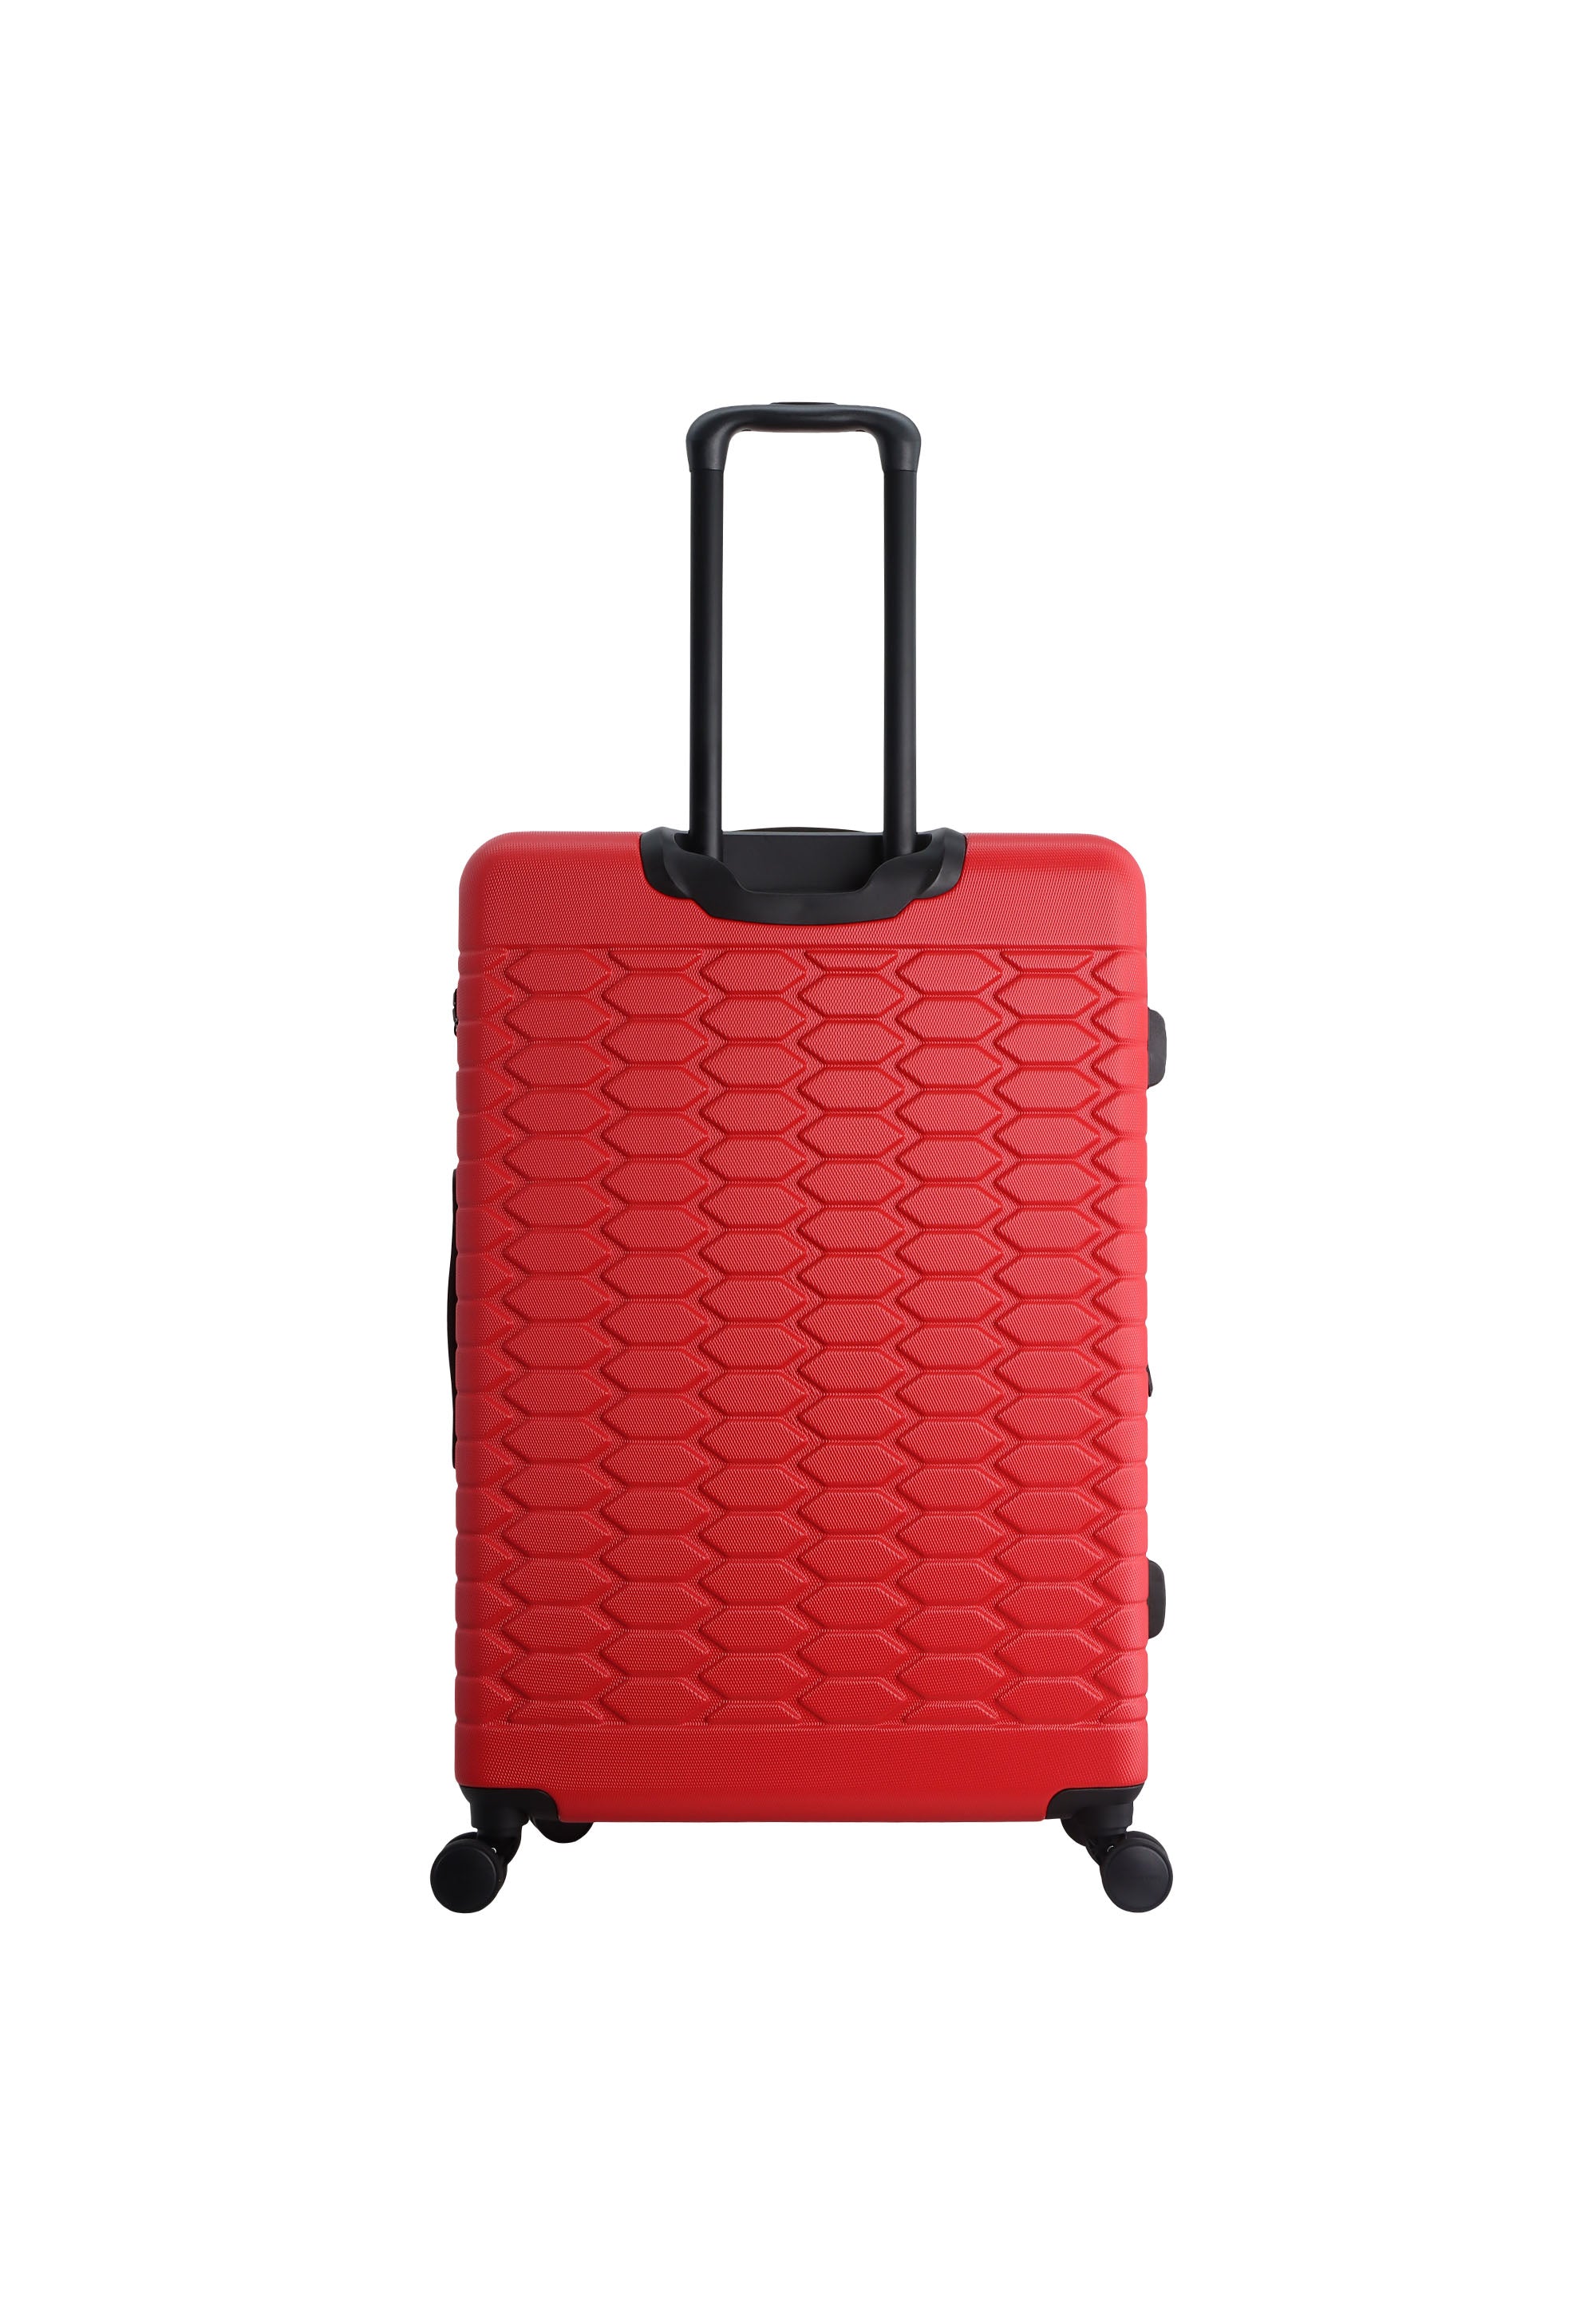 Discovery - Reptile Hartschalenkoffer / Trolley / Reisekoffer - 77 cm - (Large) - Rot